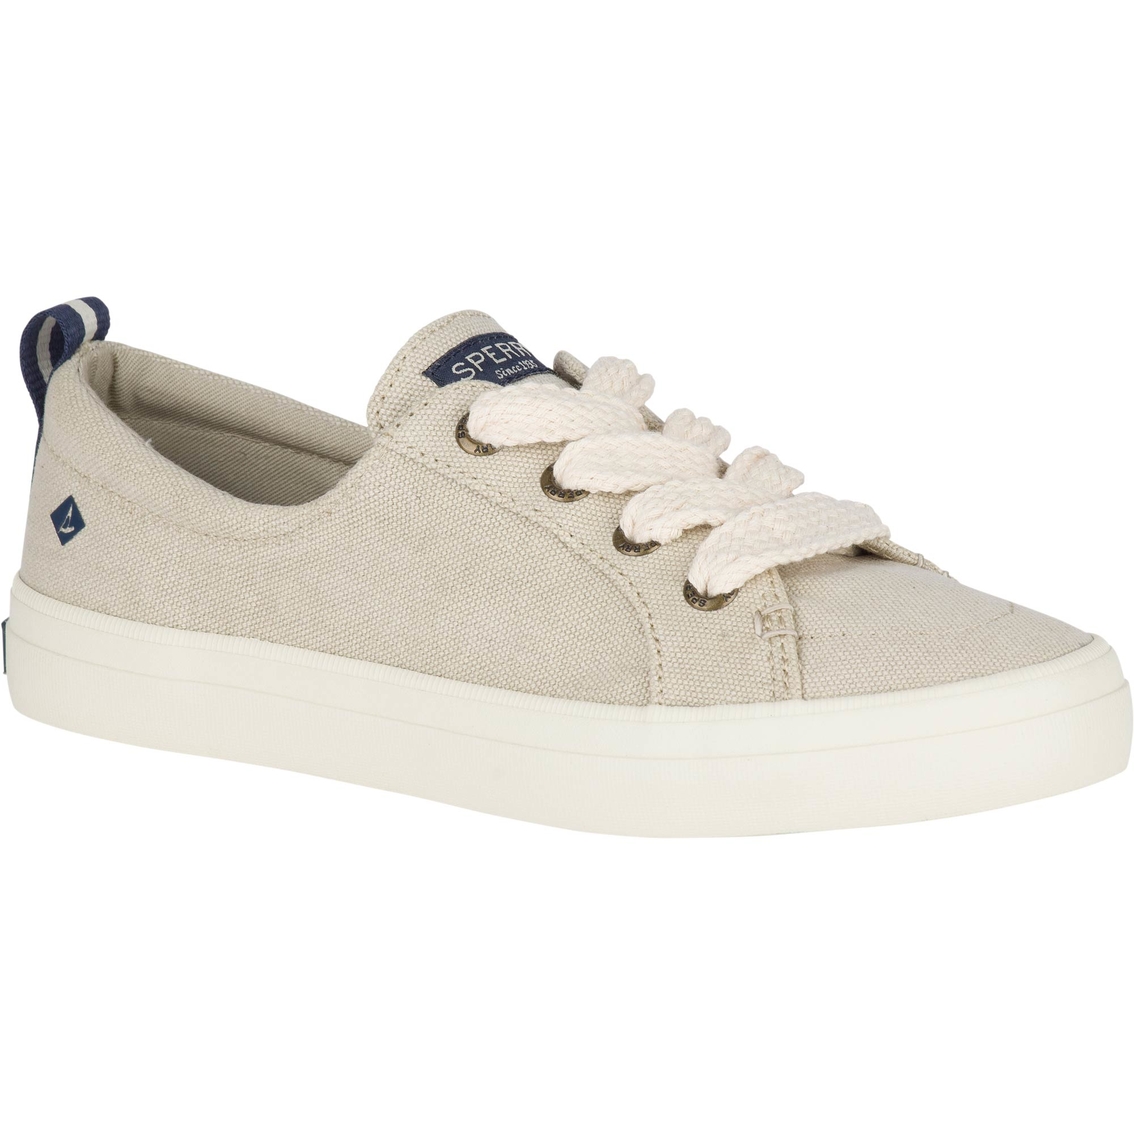 Sperry Women's Crest Vibe Chubby Lace 